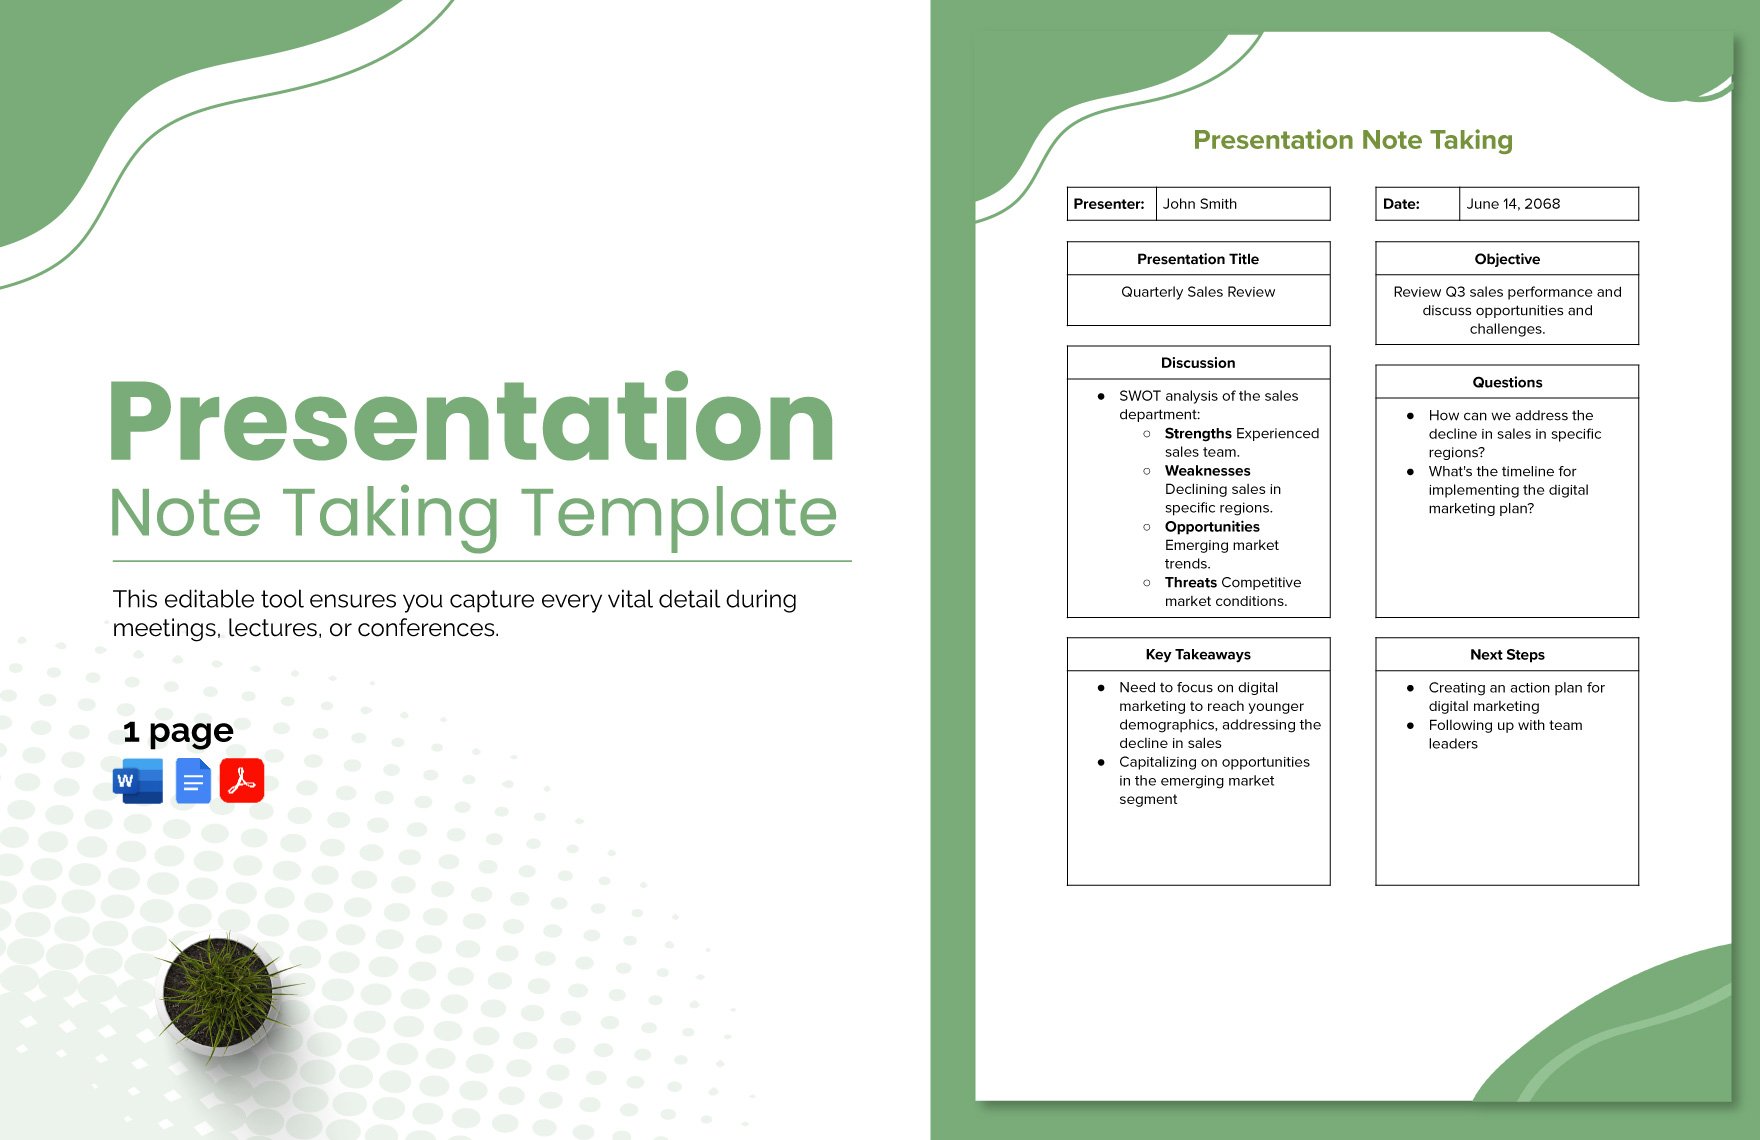 Free Presentation Note Taking Template in Word, Google Docs, PDF